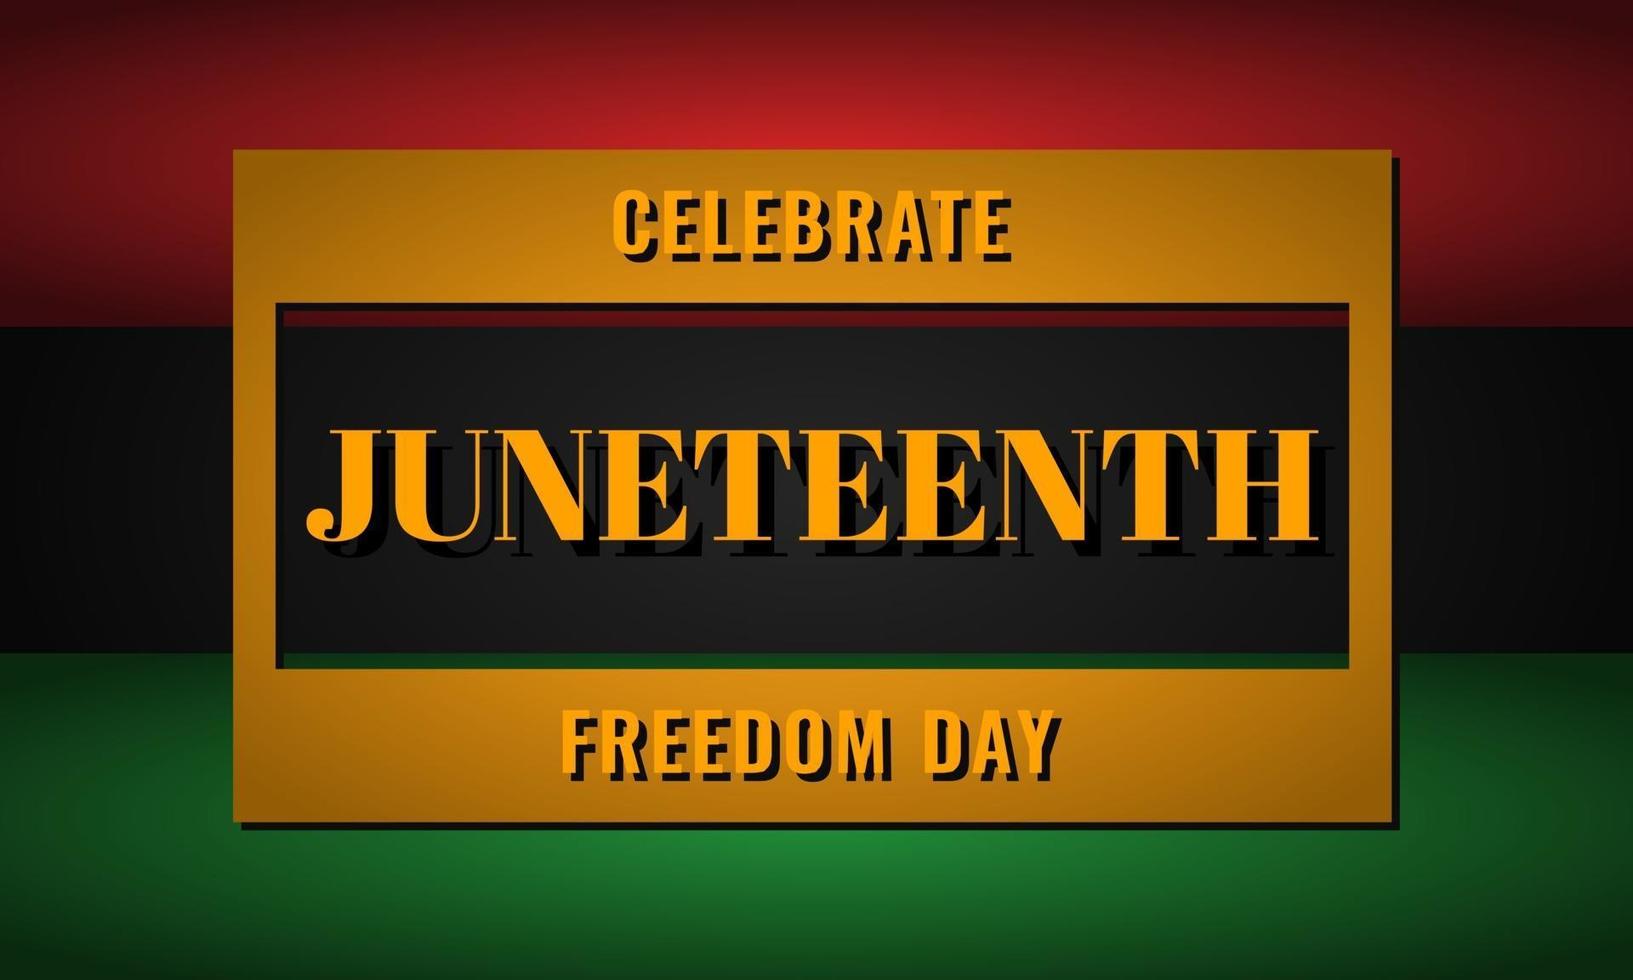 Juneteenth Freedom Day Background Design vector